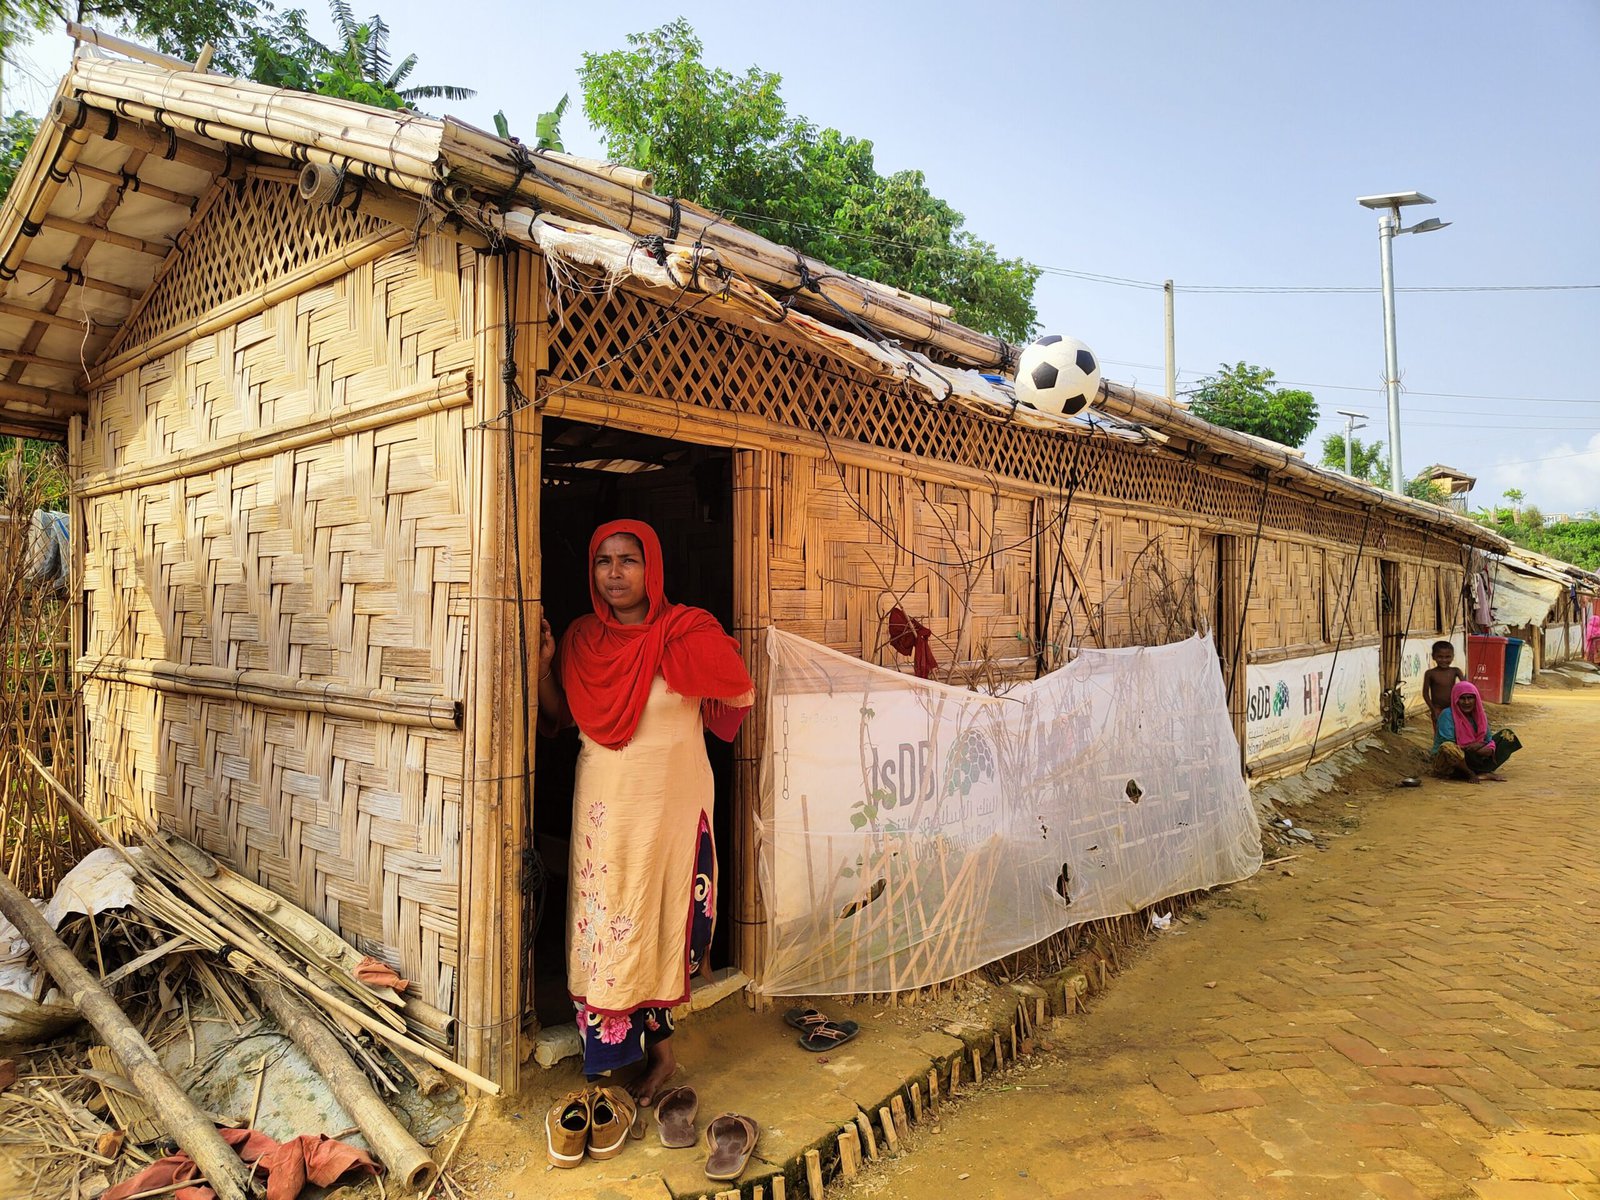 A Rohingya woman stands at the door of the shelter that she was provided after her old shelter was affected by a landslide in another camp.